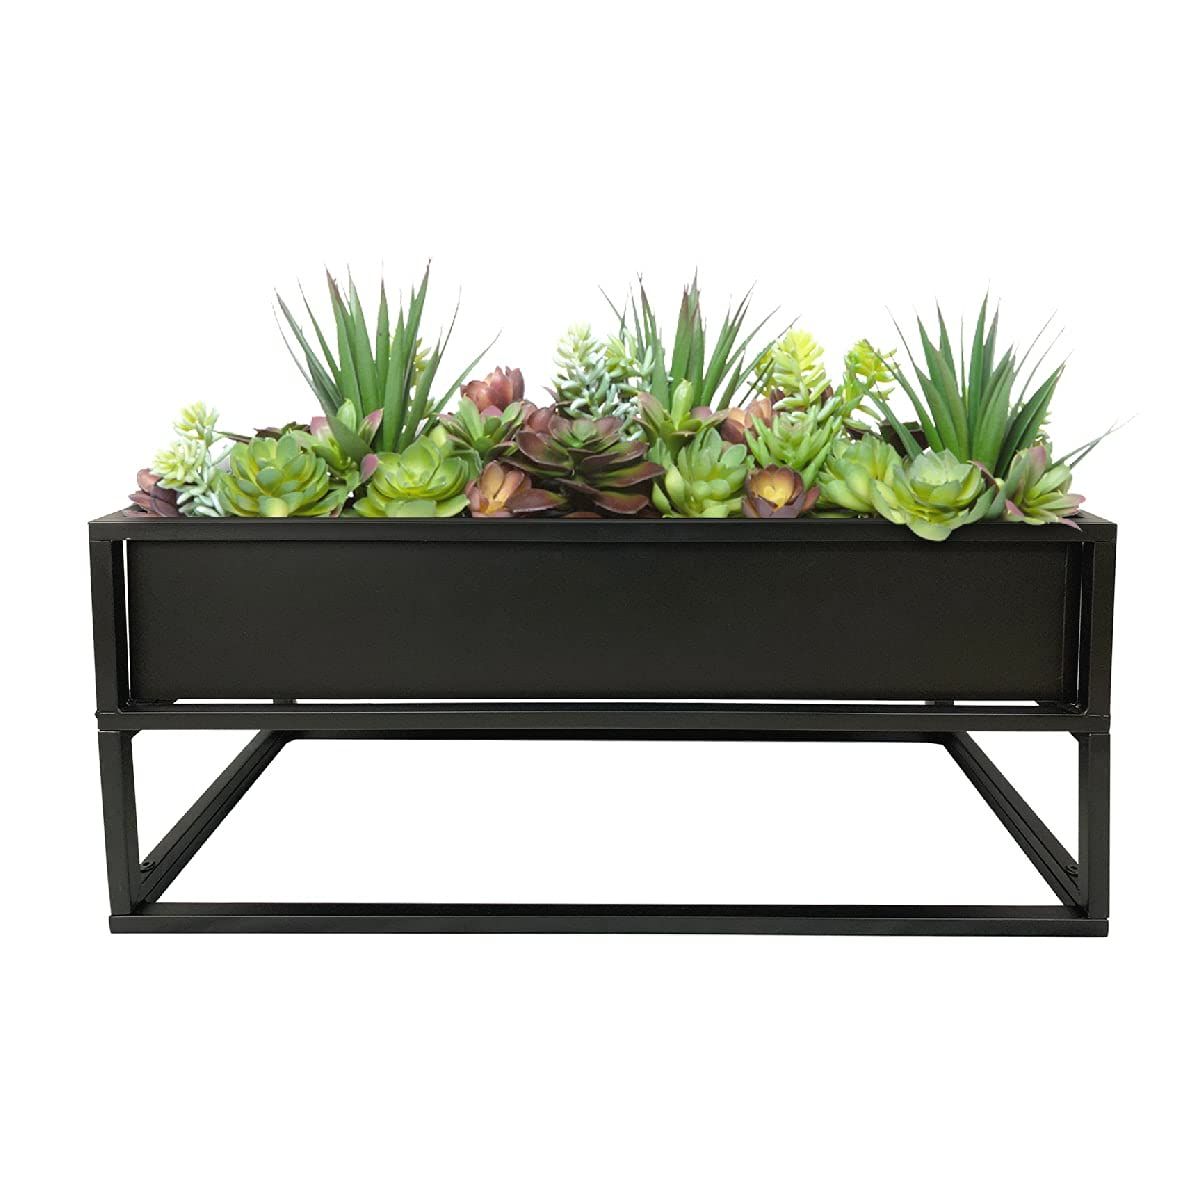 Plant Stands With Flower Box For Preferred Amazon : Cocoyard Modern Elevated Metal Planter Box – Made Durable And  Resilient Metal – Indoor Outdoor Plant Stand – Ideal For Garden Decor,  Backyard And Patio Decor : Patio, Lawn & Garden (View 6 of 10)